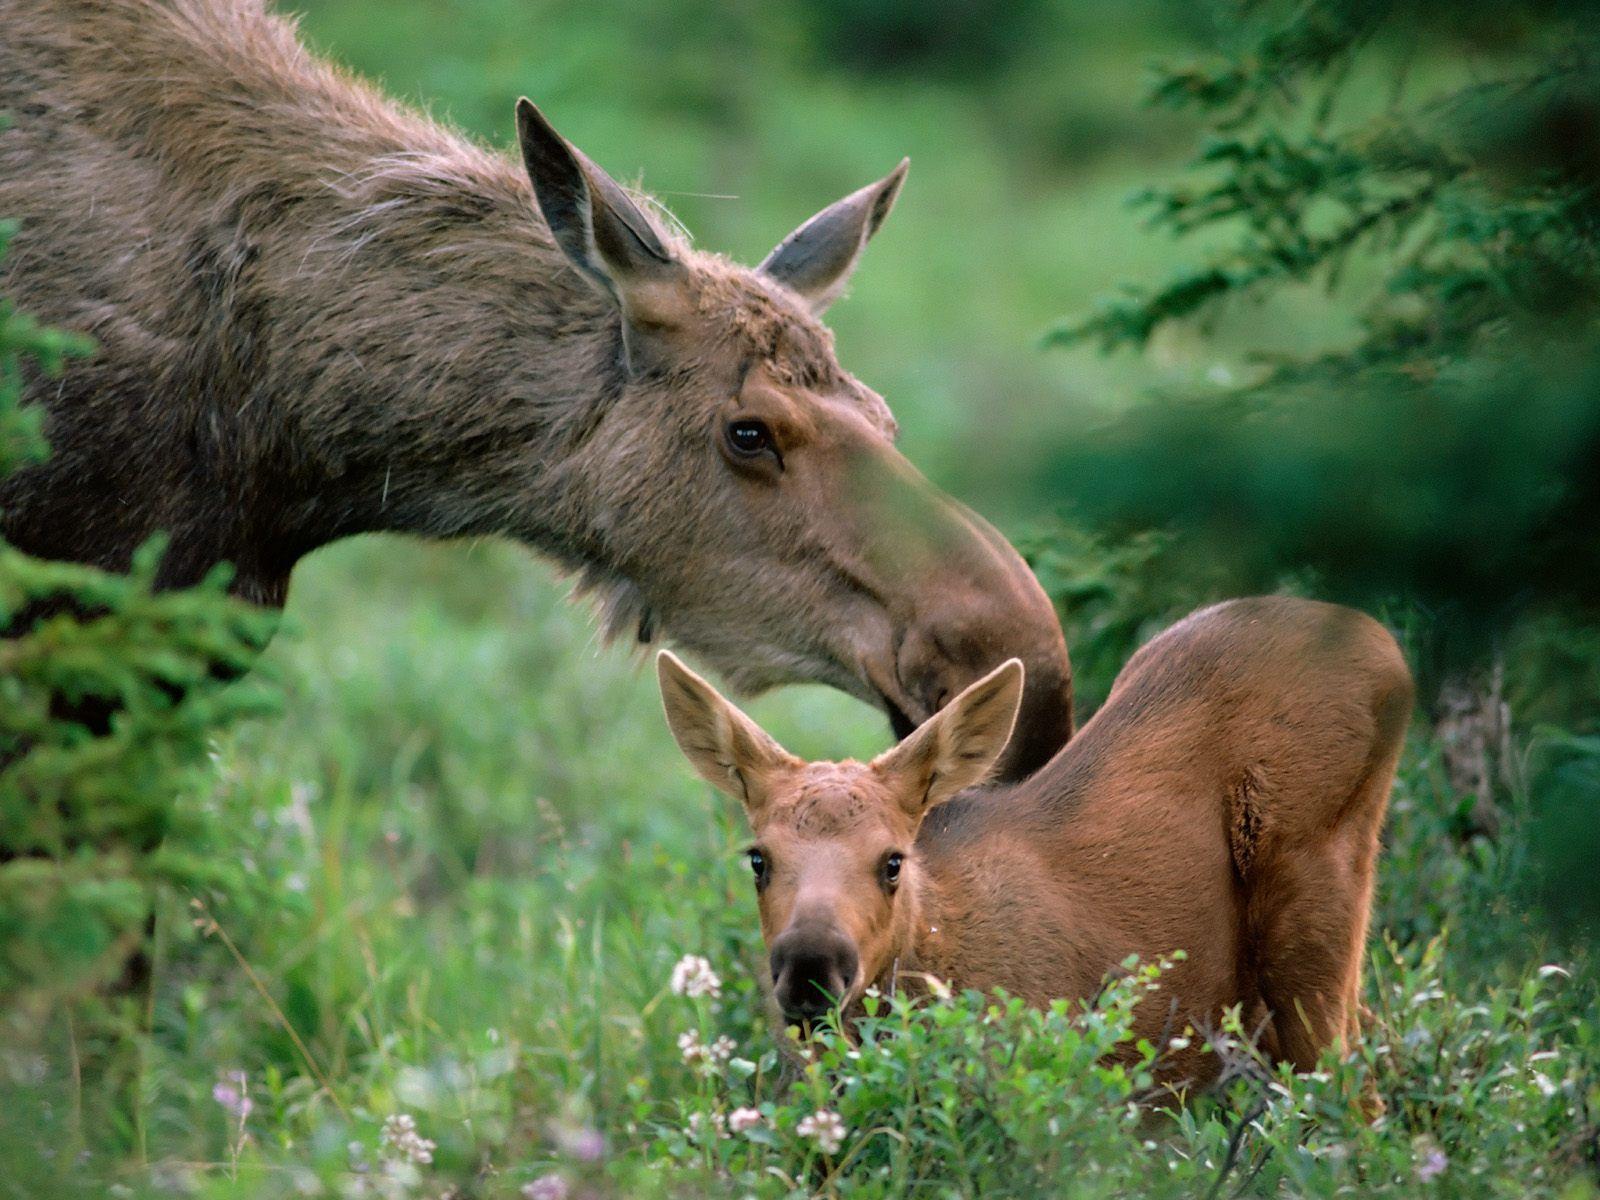 mother and baby animals